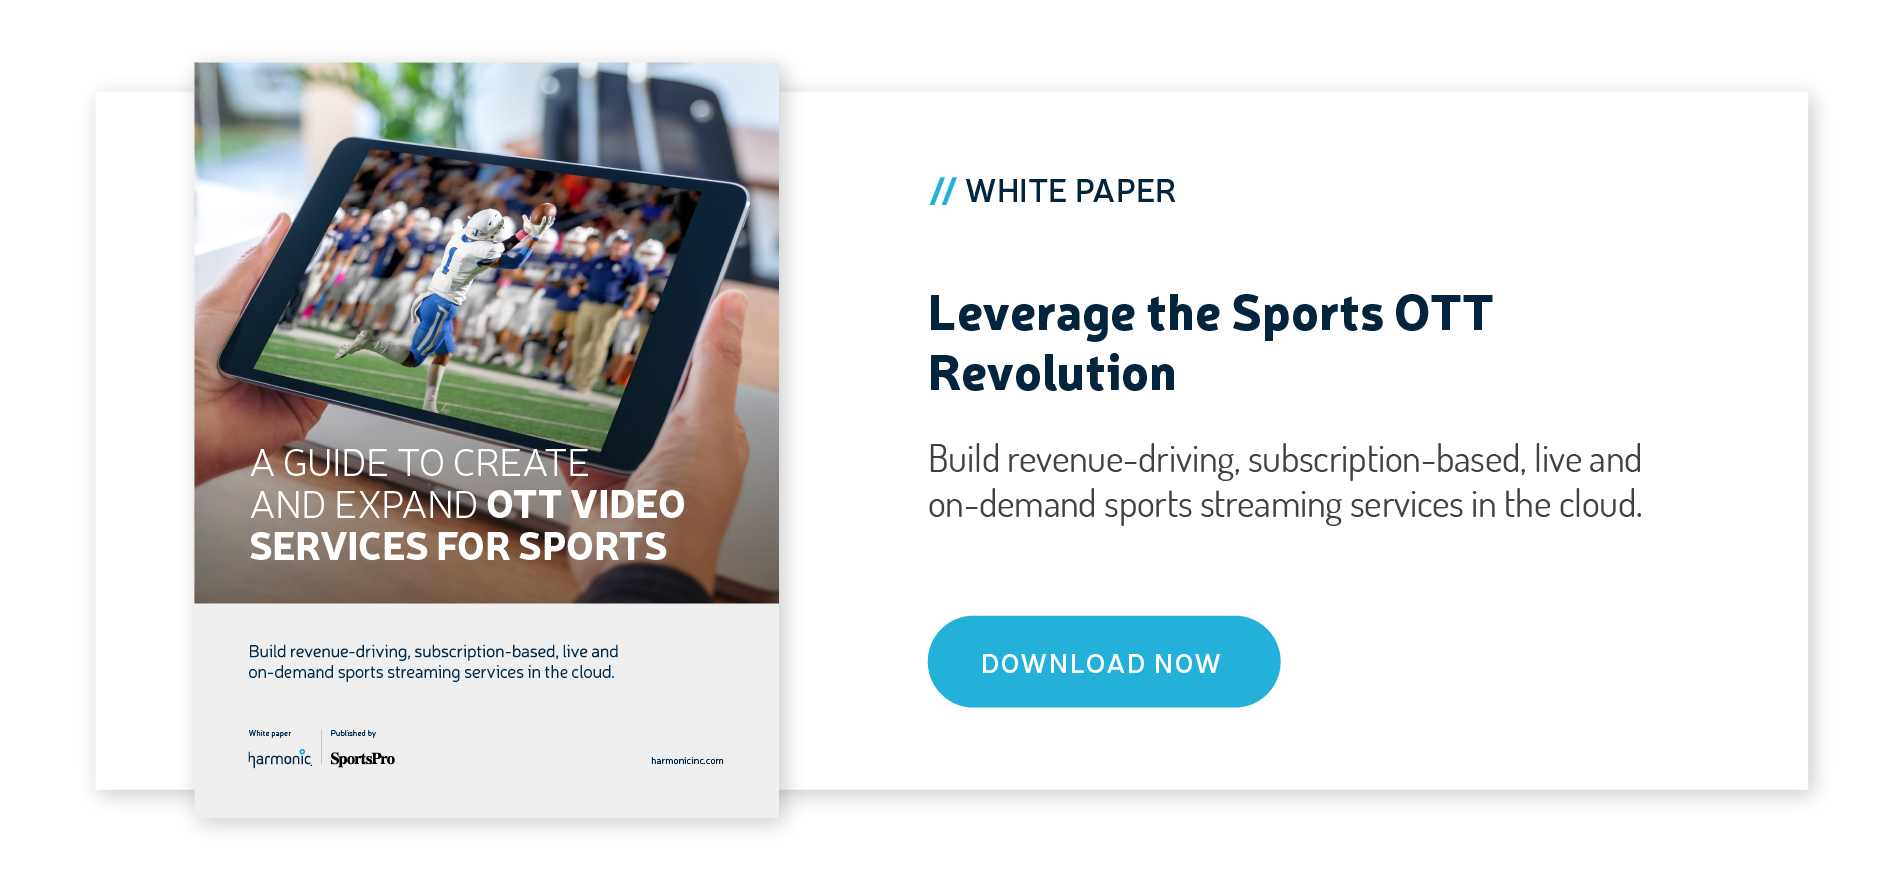 5 Ways to Boost Your Revenues with Live OTT Sports Streaming